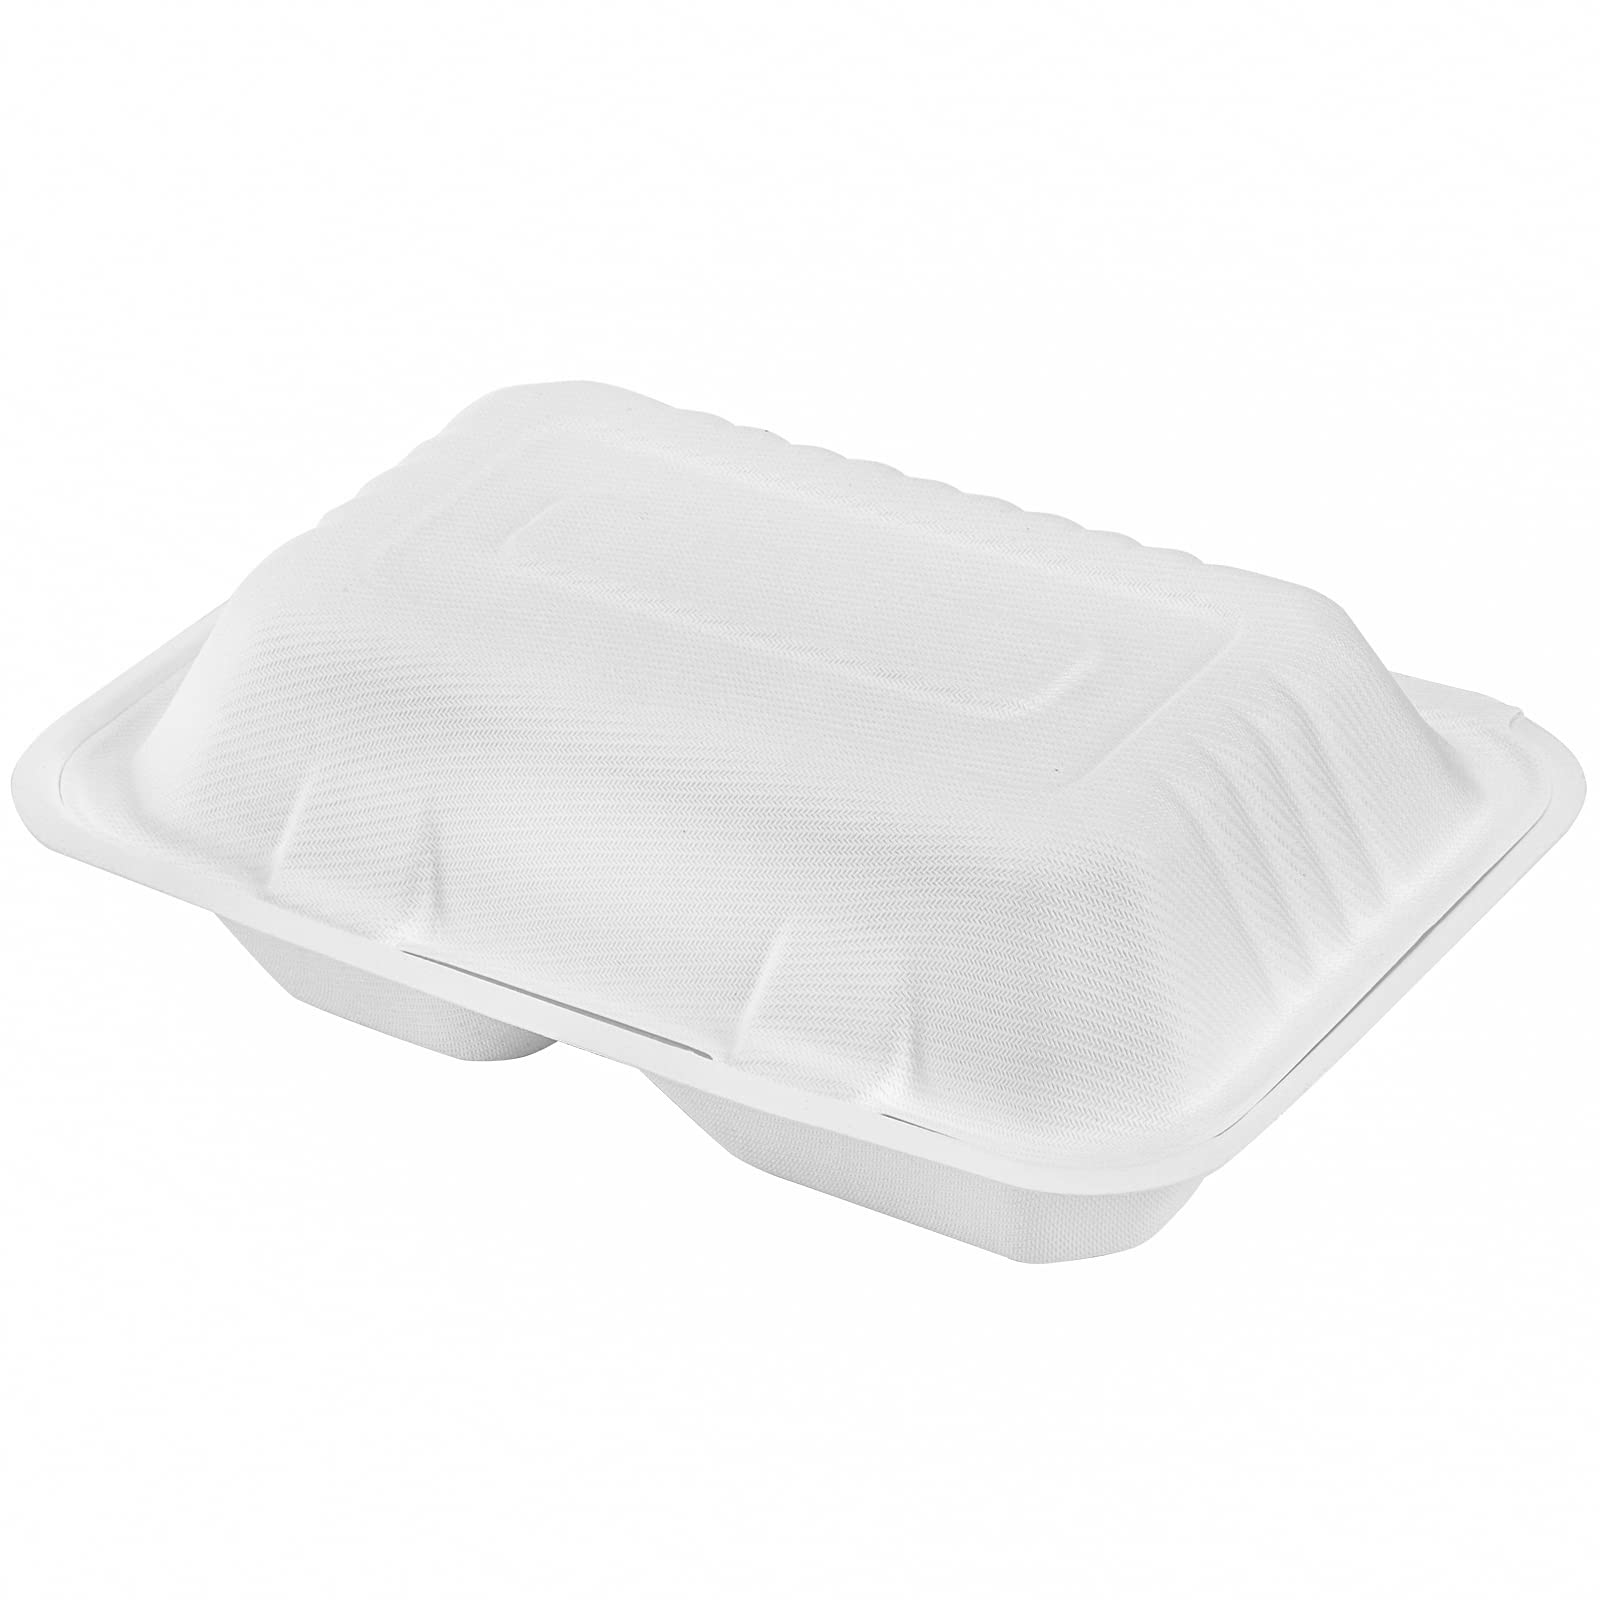 Elsjoy 90 Pack 9"x 6" Clamshell Take Out Containers, 2 Compartment Compostable Hinged Food Containers Disposable To Go Boxes, Sugar Cane Takeaway Boxes for Restaurant, Party, Microwave Safe